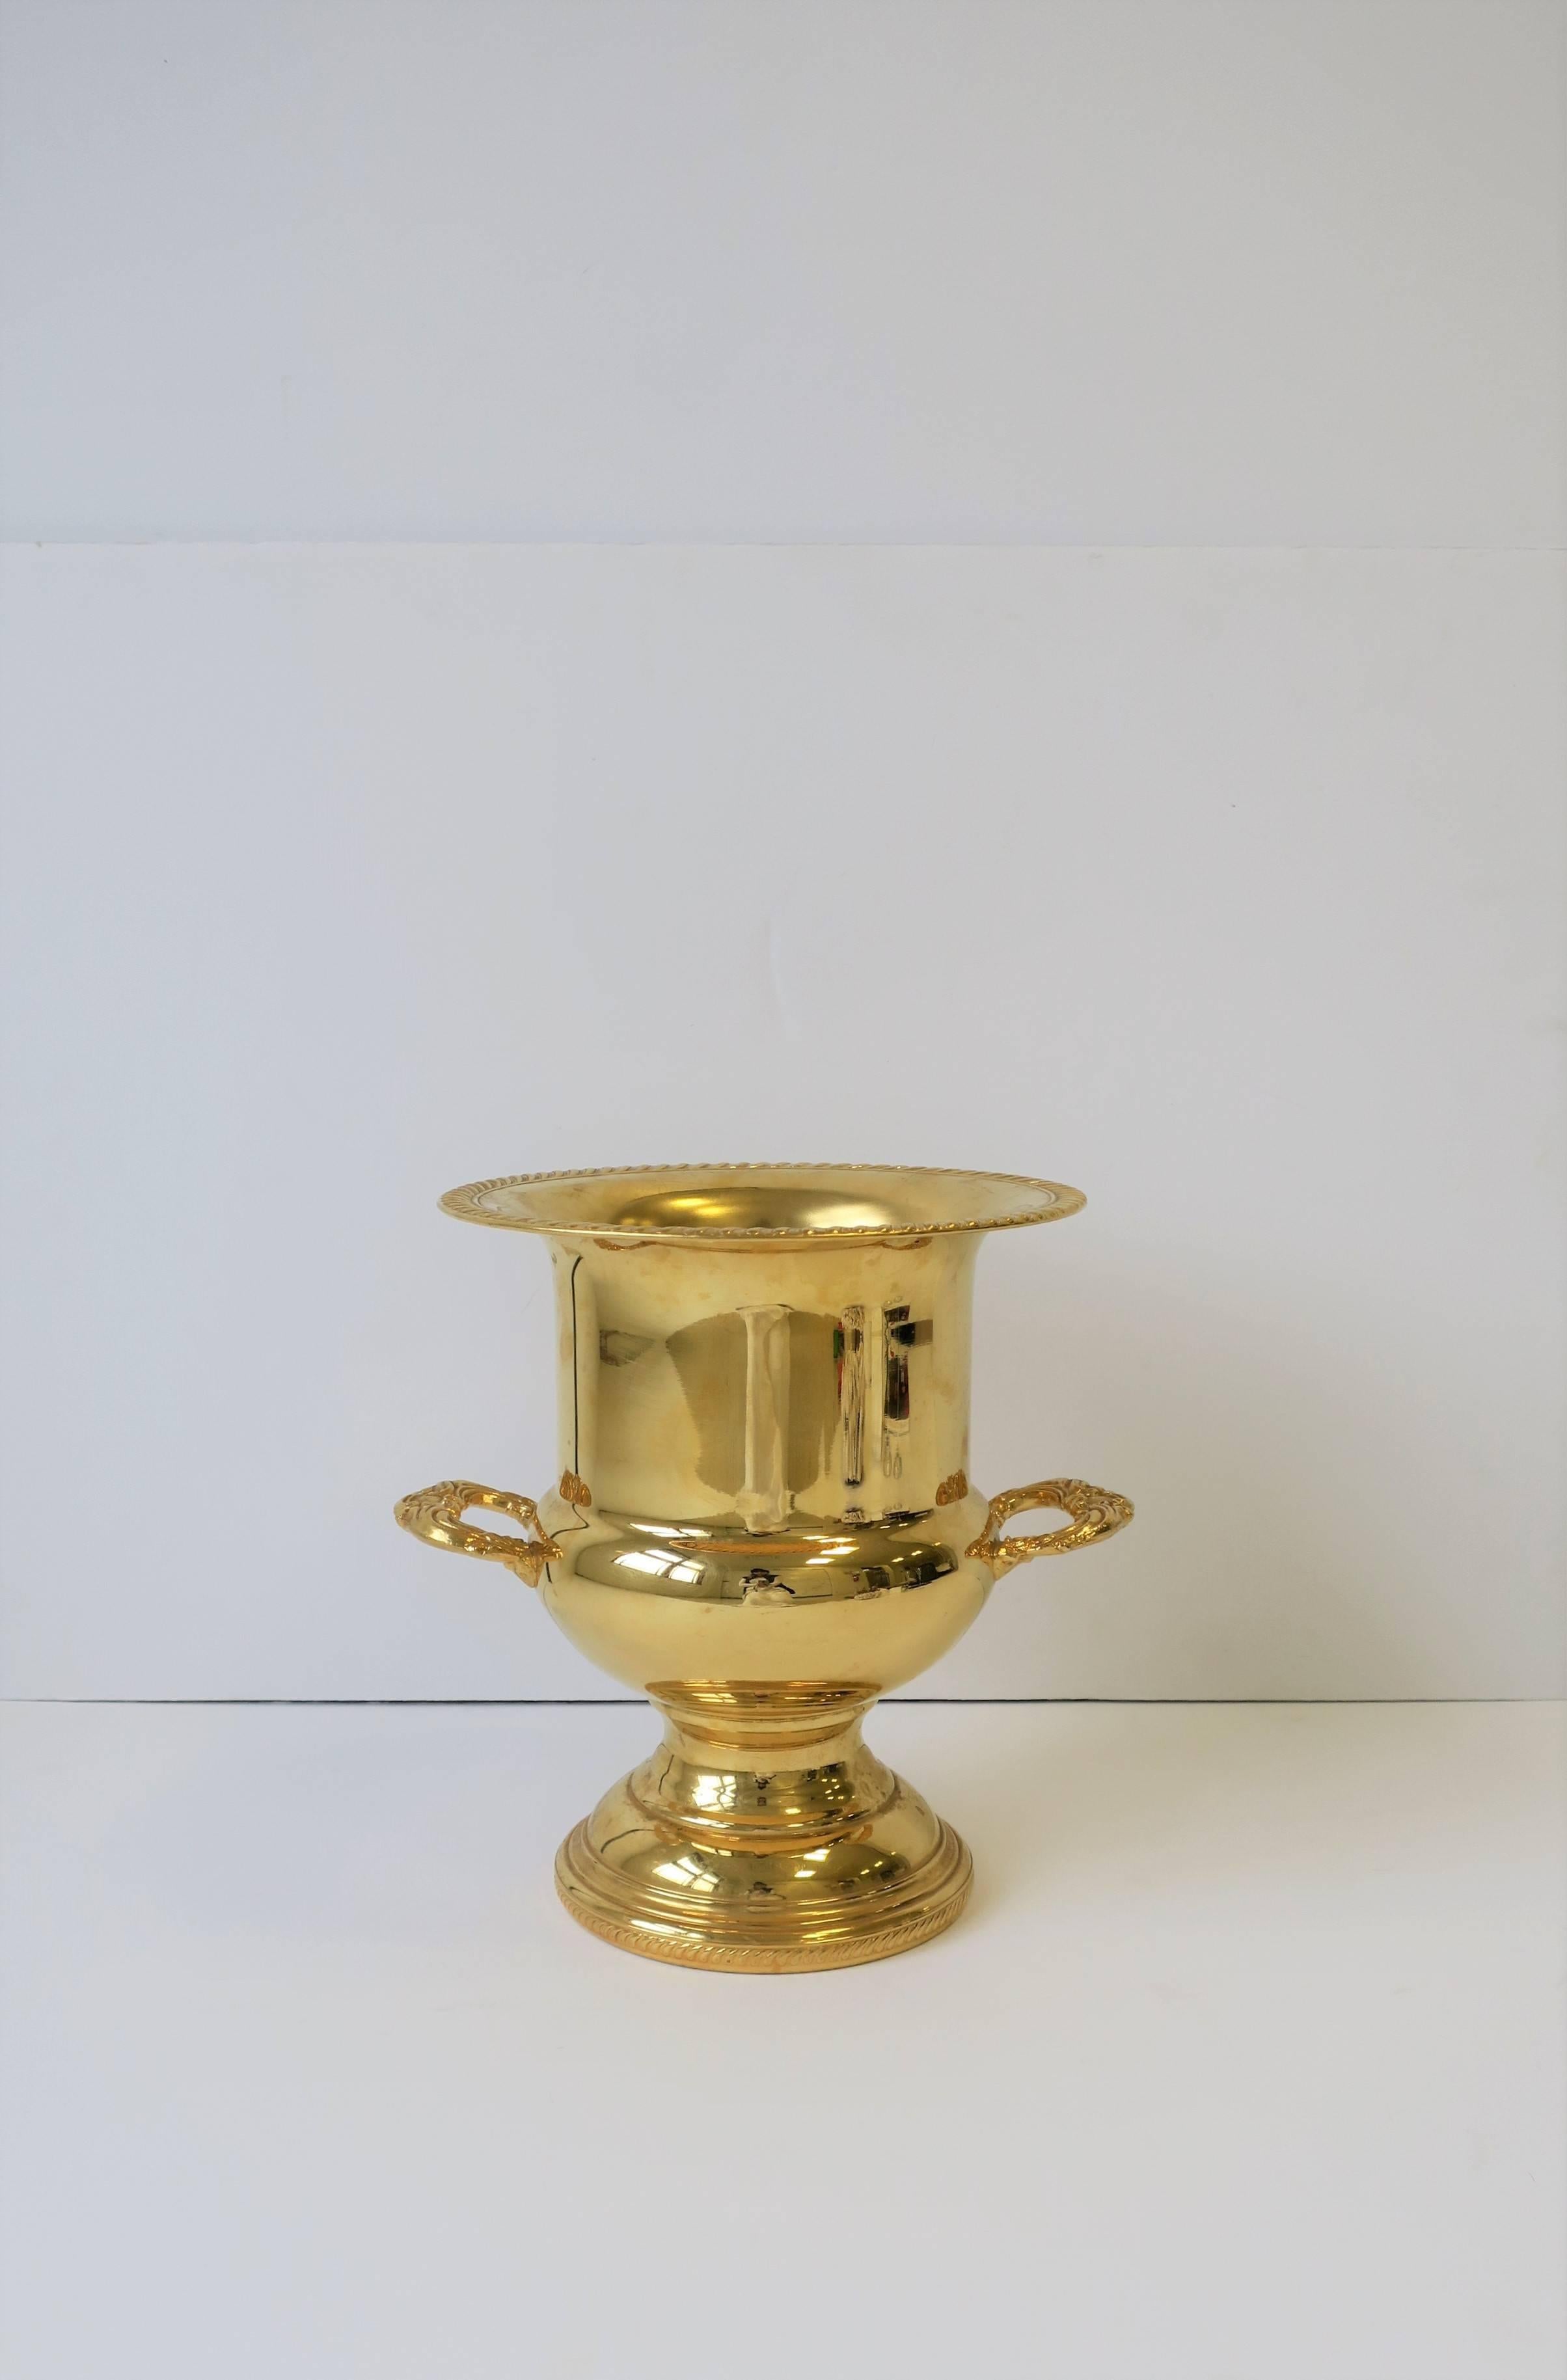 A beautiful 24-karat gold-plated champagne/wine cooler or ice bucket. Gold-plated finish will not tarnish. With maker's mark on bottom as show in image #9. 

Item available here online. By request, item can be made available by appointment to the